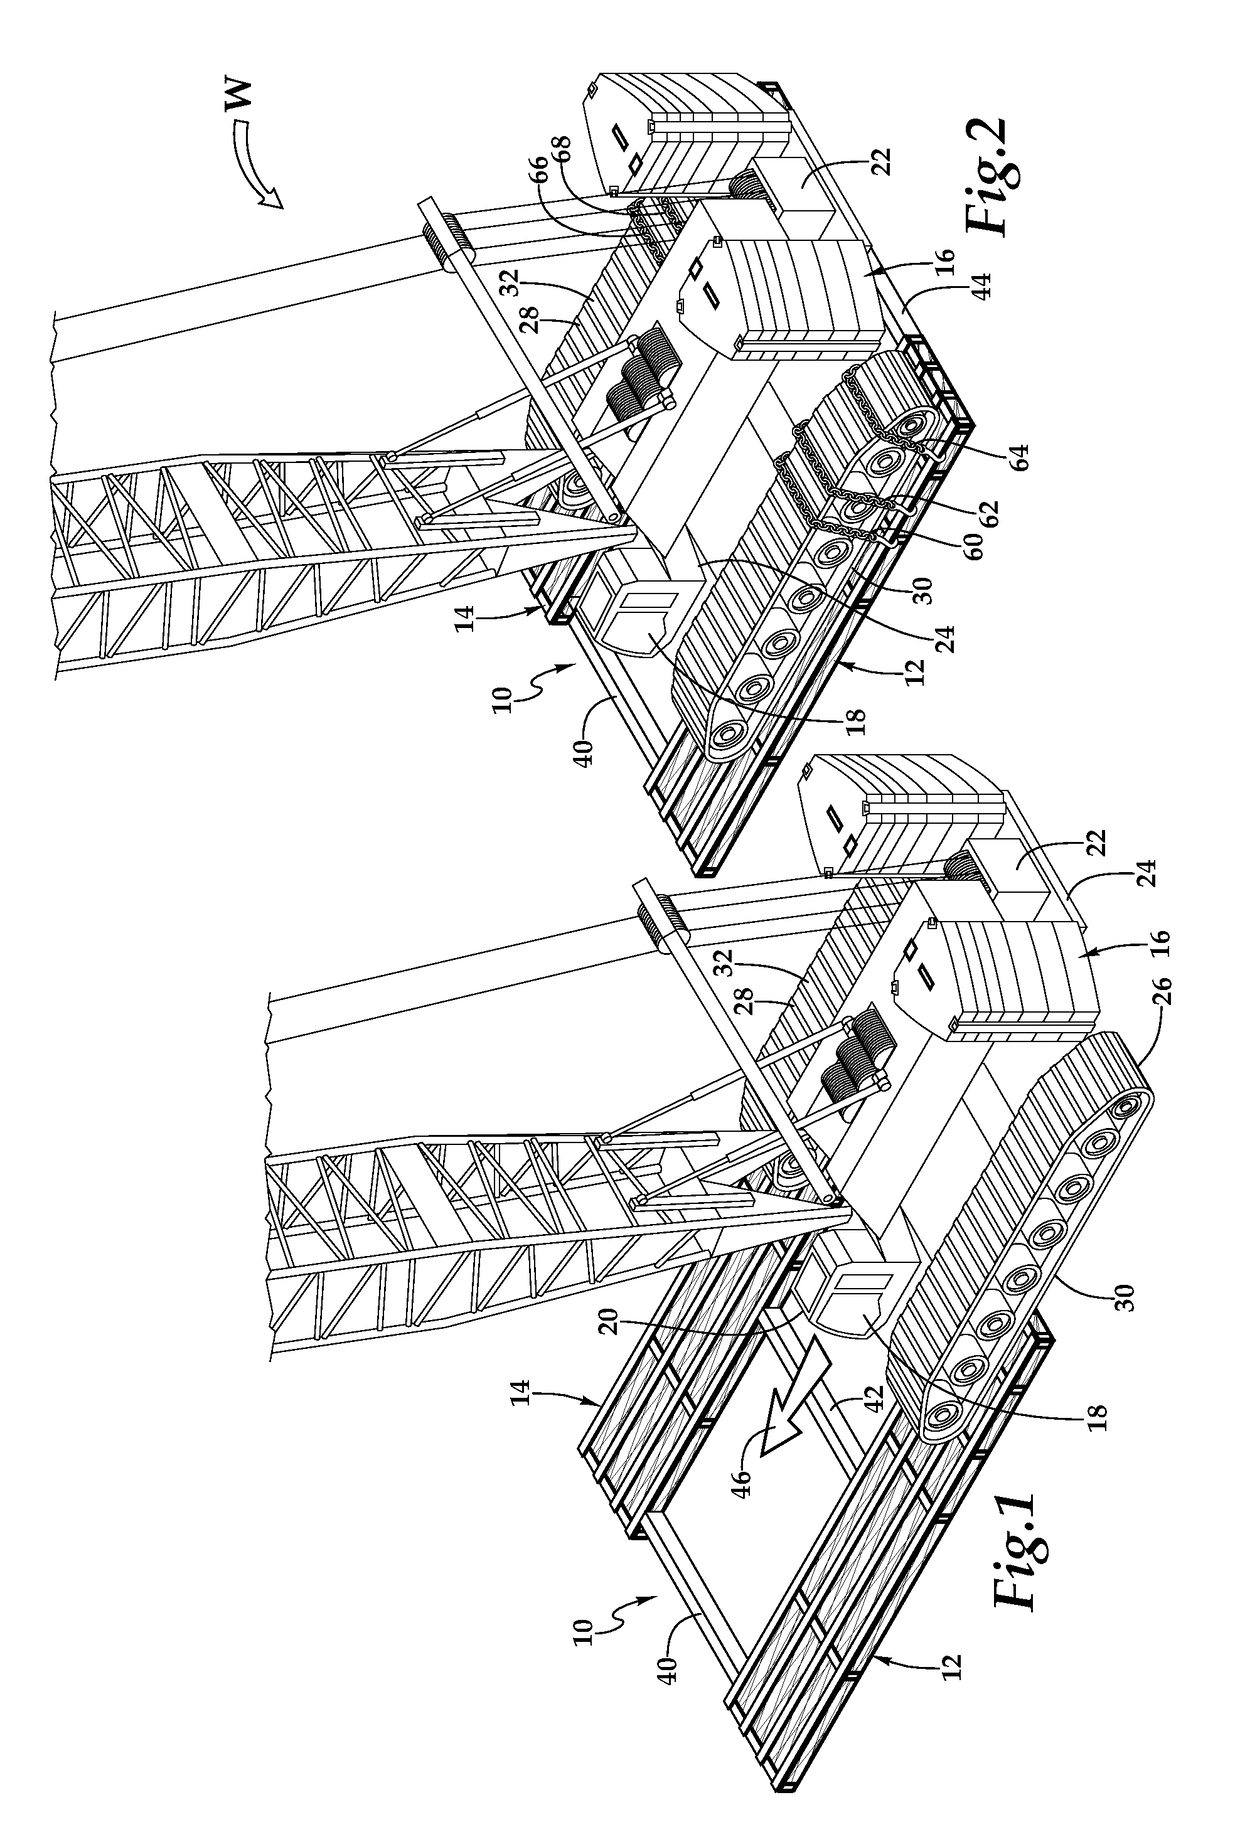 Securement for Crawler Cranes and System and Method for Use of Same